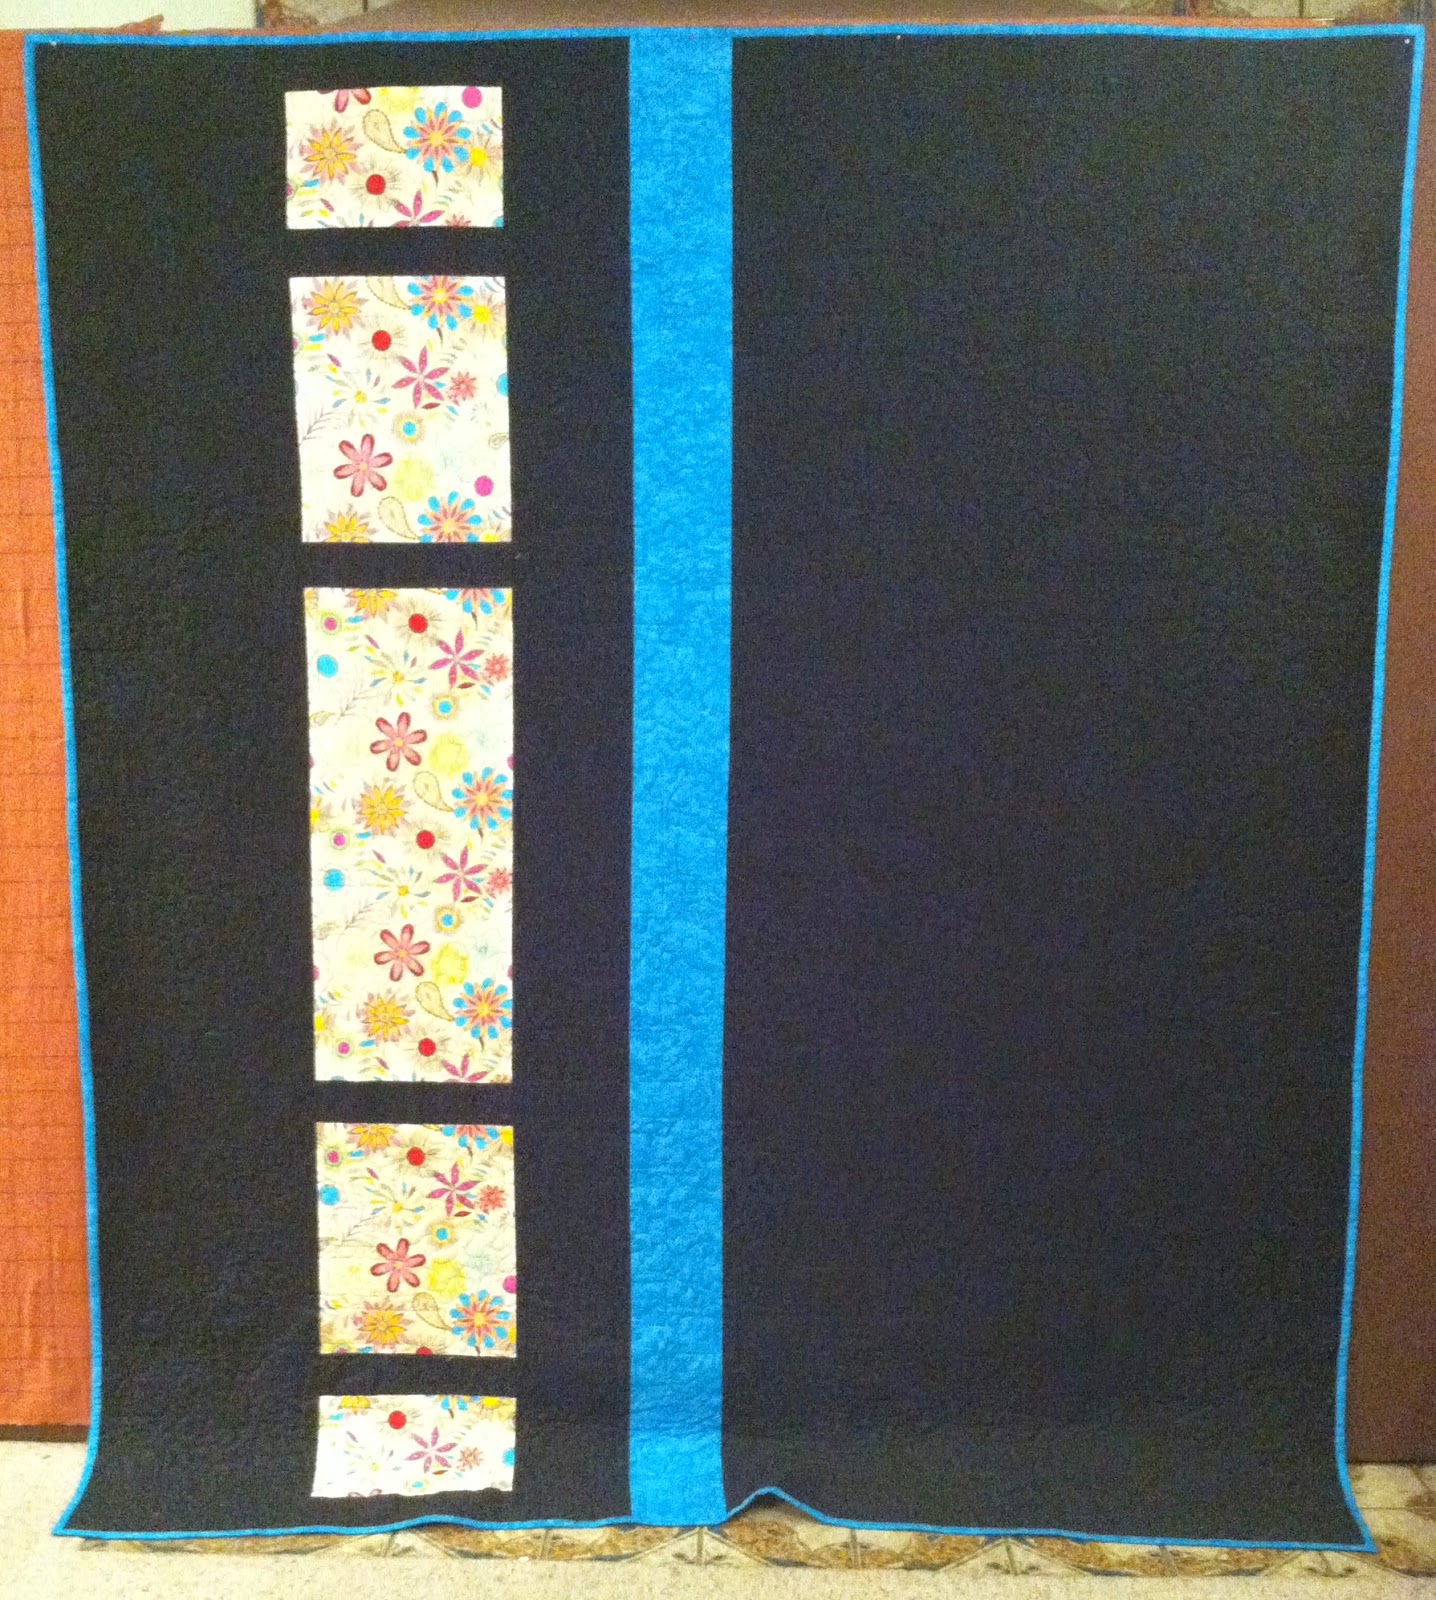 Jelly Roll Quilt - Bright colors against a black background is stunning! Reversible too!